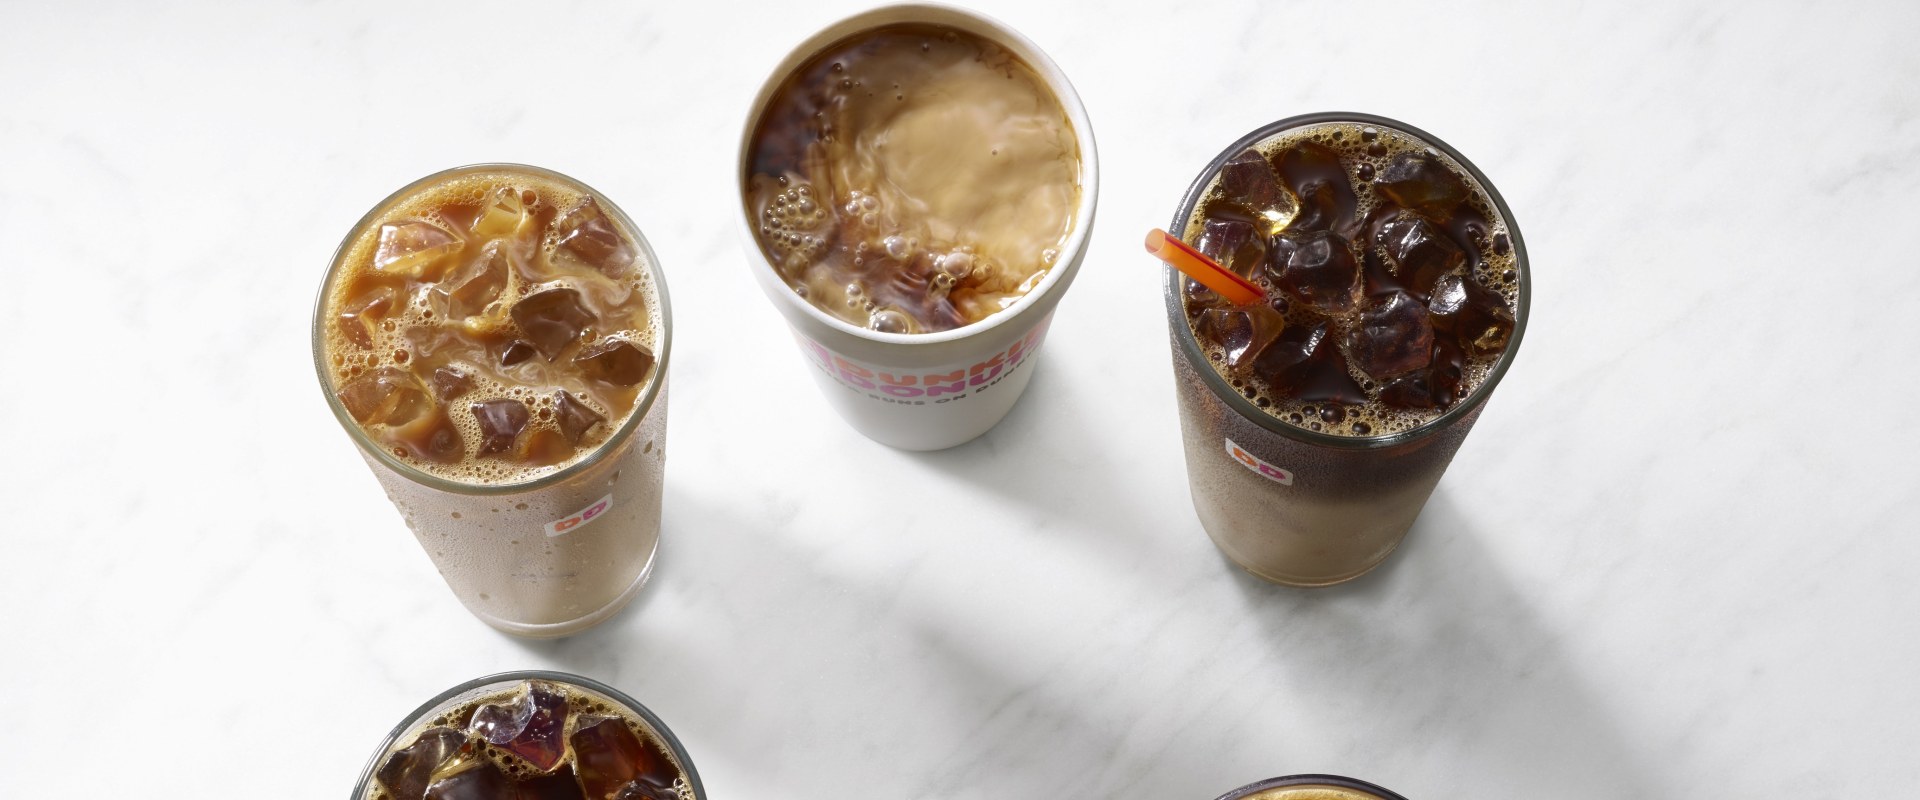 What is the Cheapest Dunkin Donuts Drink?